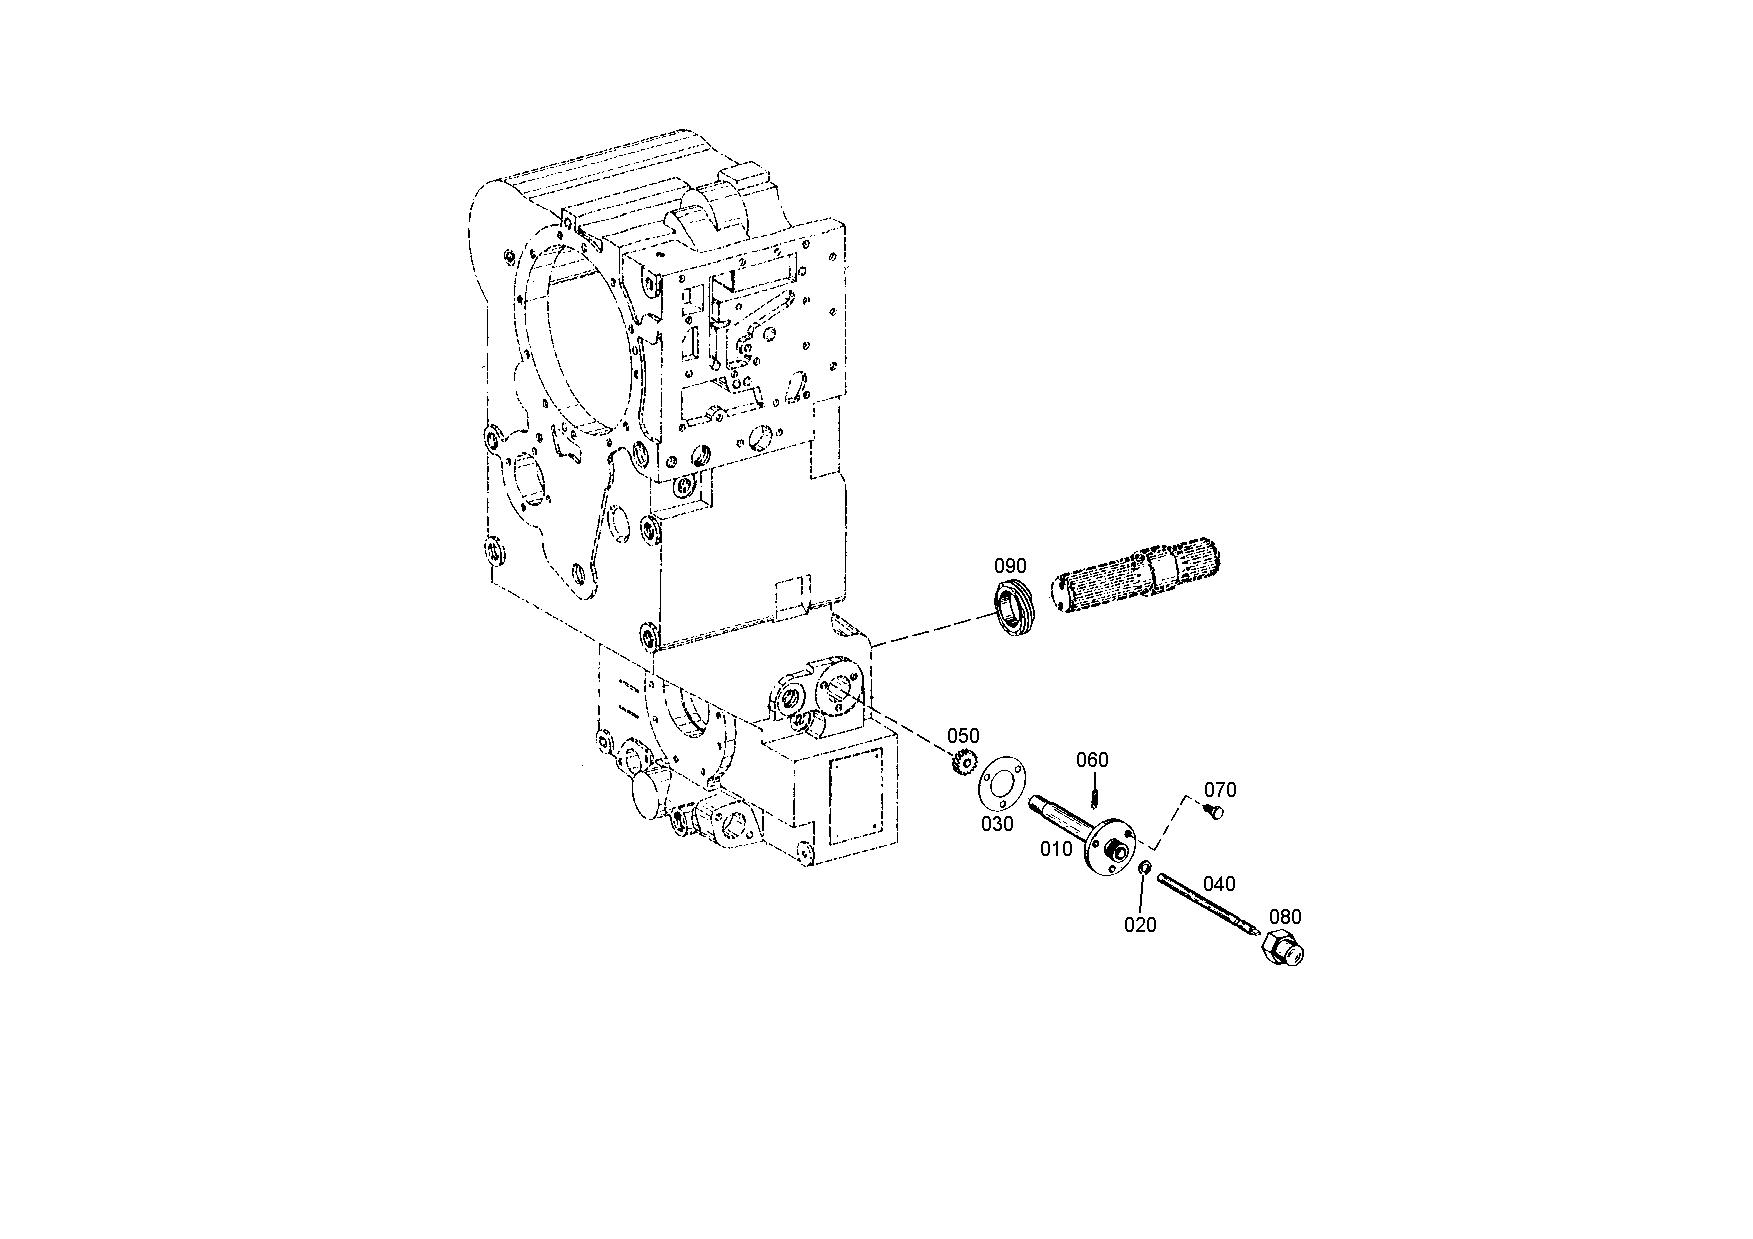 drawing for PPM 8051932 - SPEEDO CONN.PCE (figure 2)